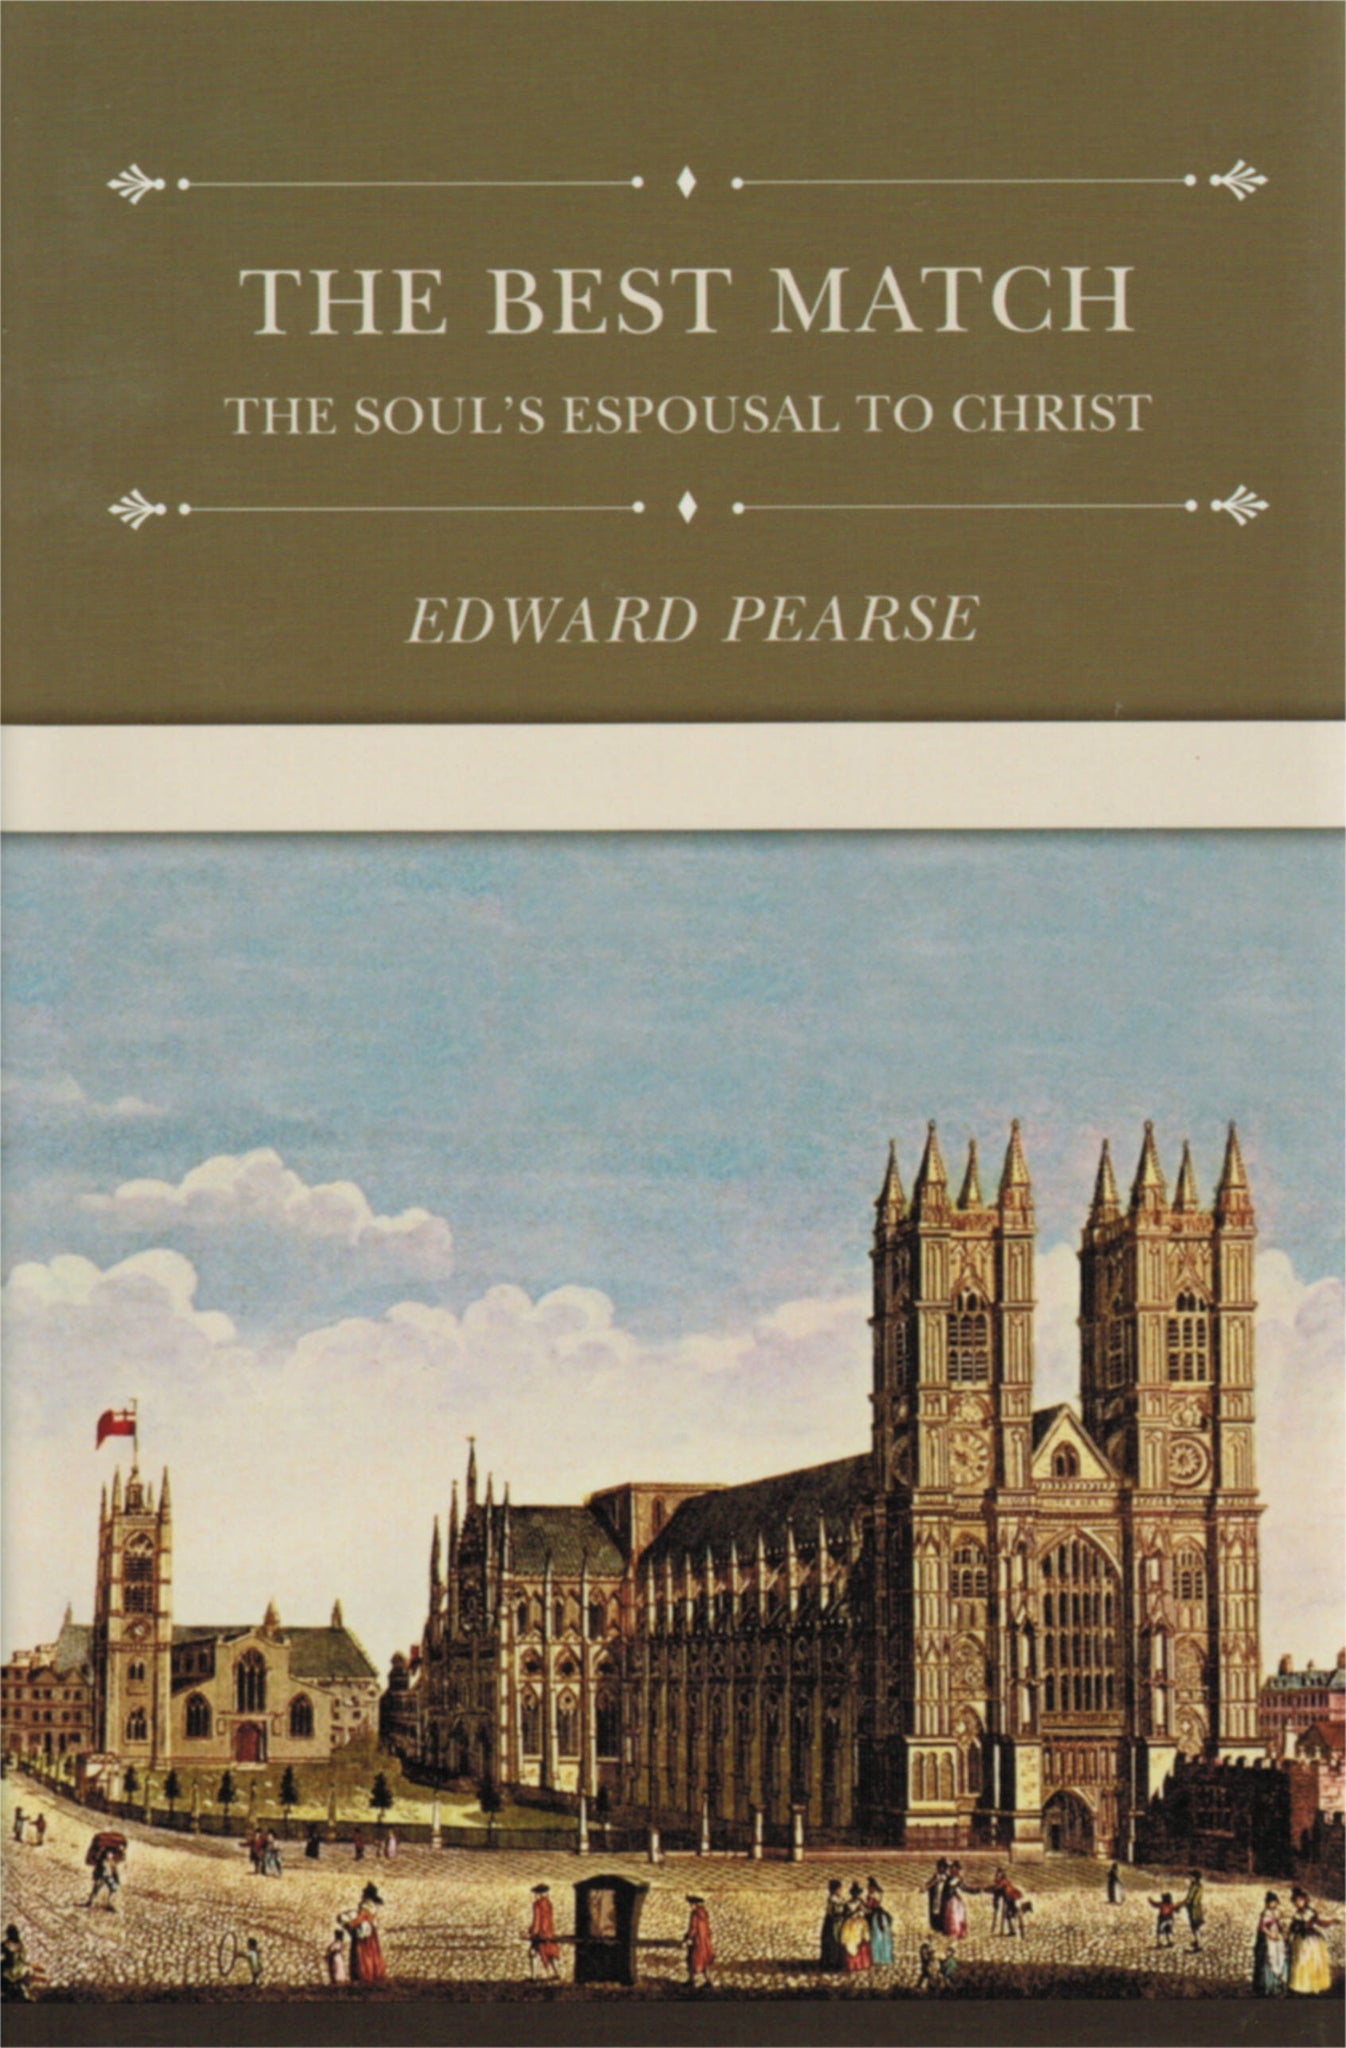 The Best Match:  The Soul's Espousal to Christ